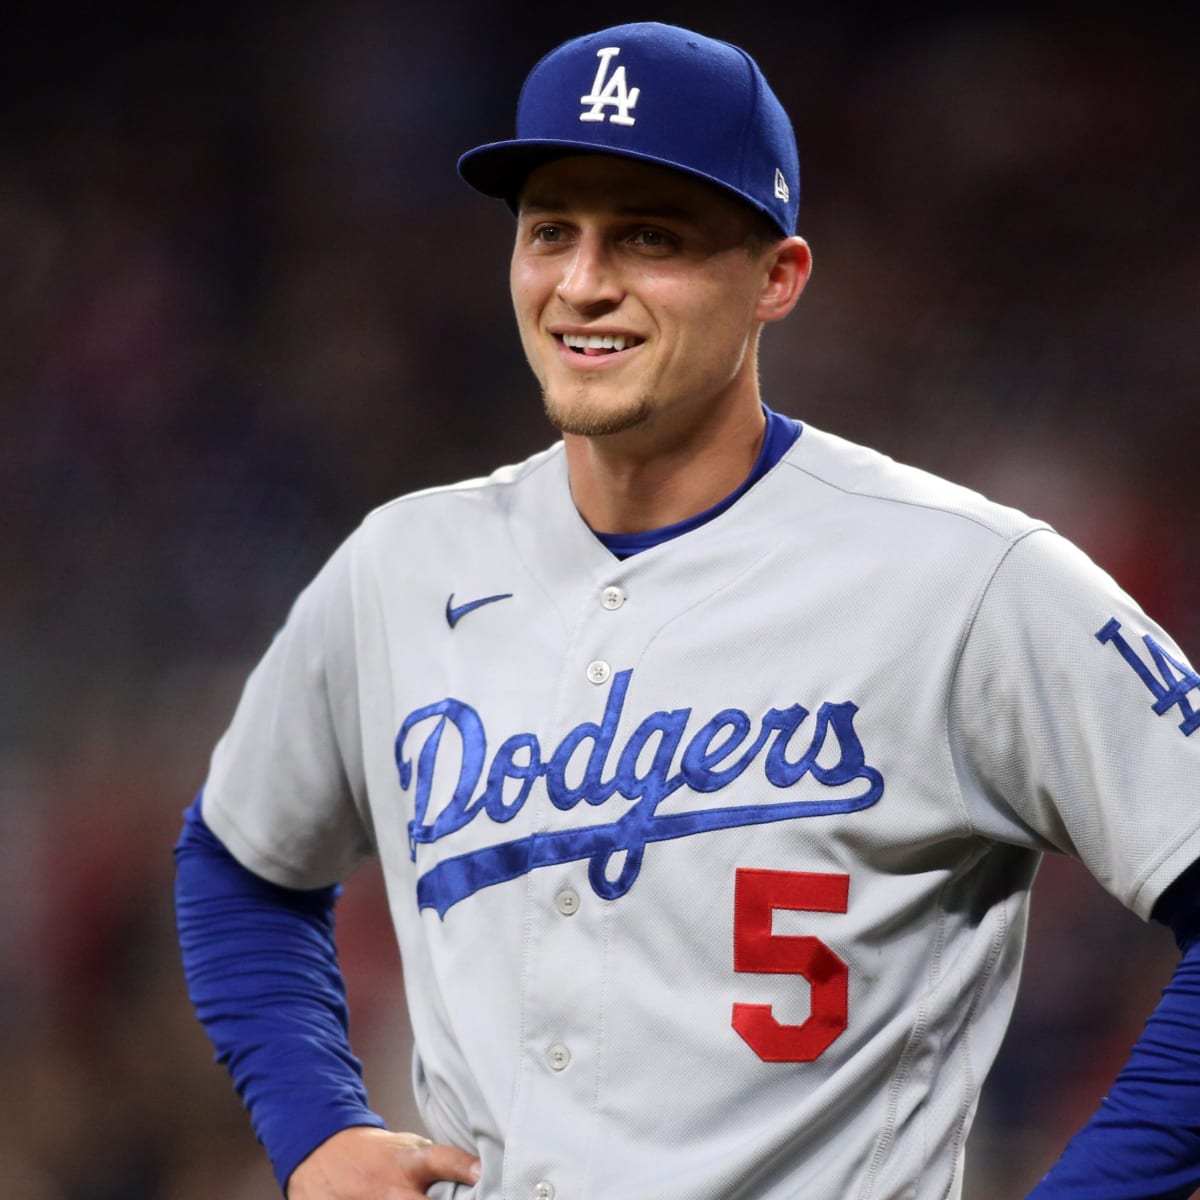 How did Rangers' sudden rise begin? It starts with Corey Seager